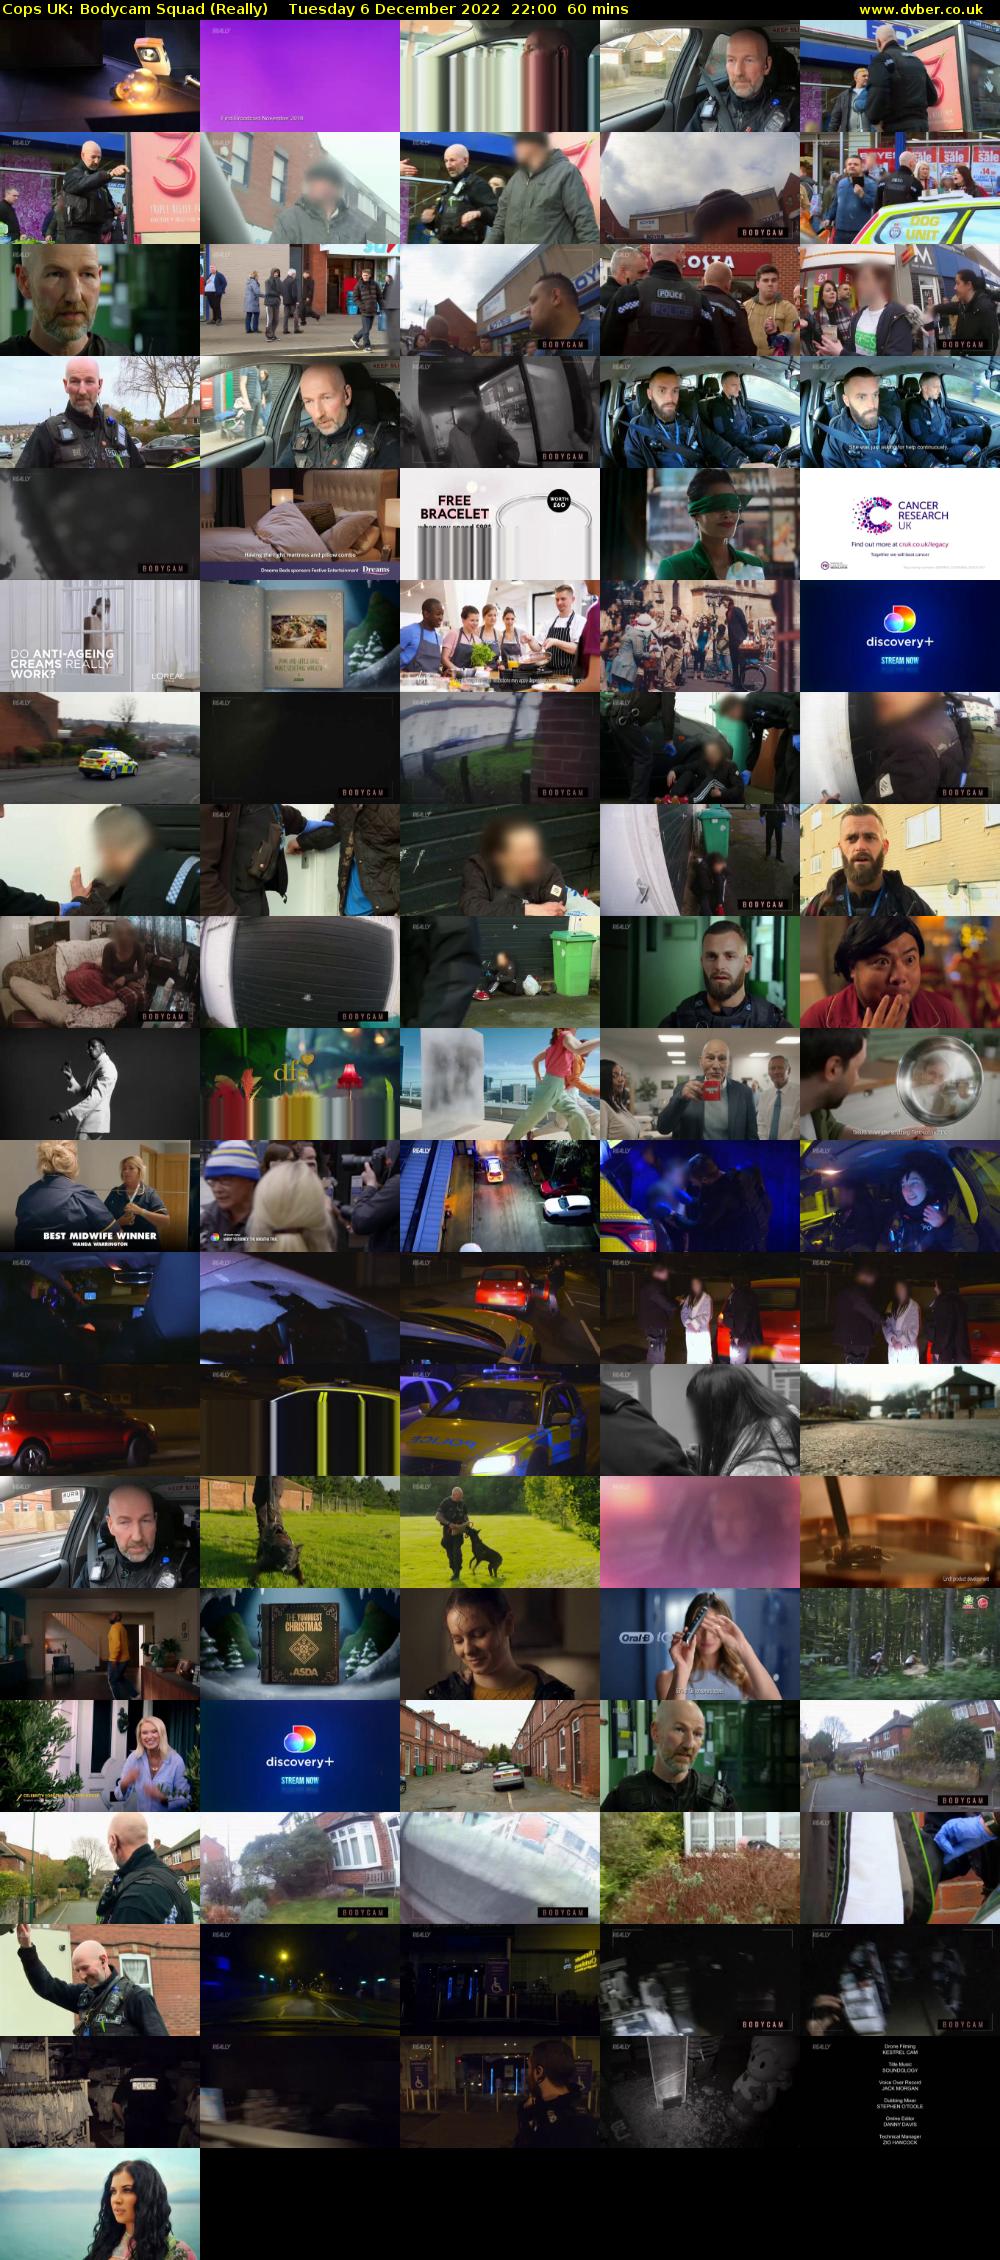 Cops UK: Bodycam Squad (Really) Tuesday 6 December 2022 22:00 - 23:00